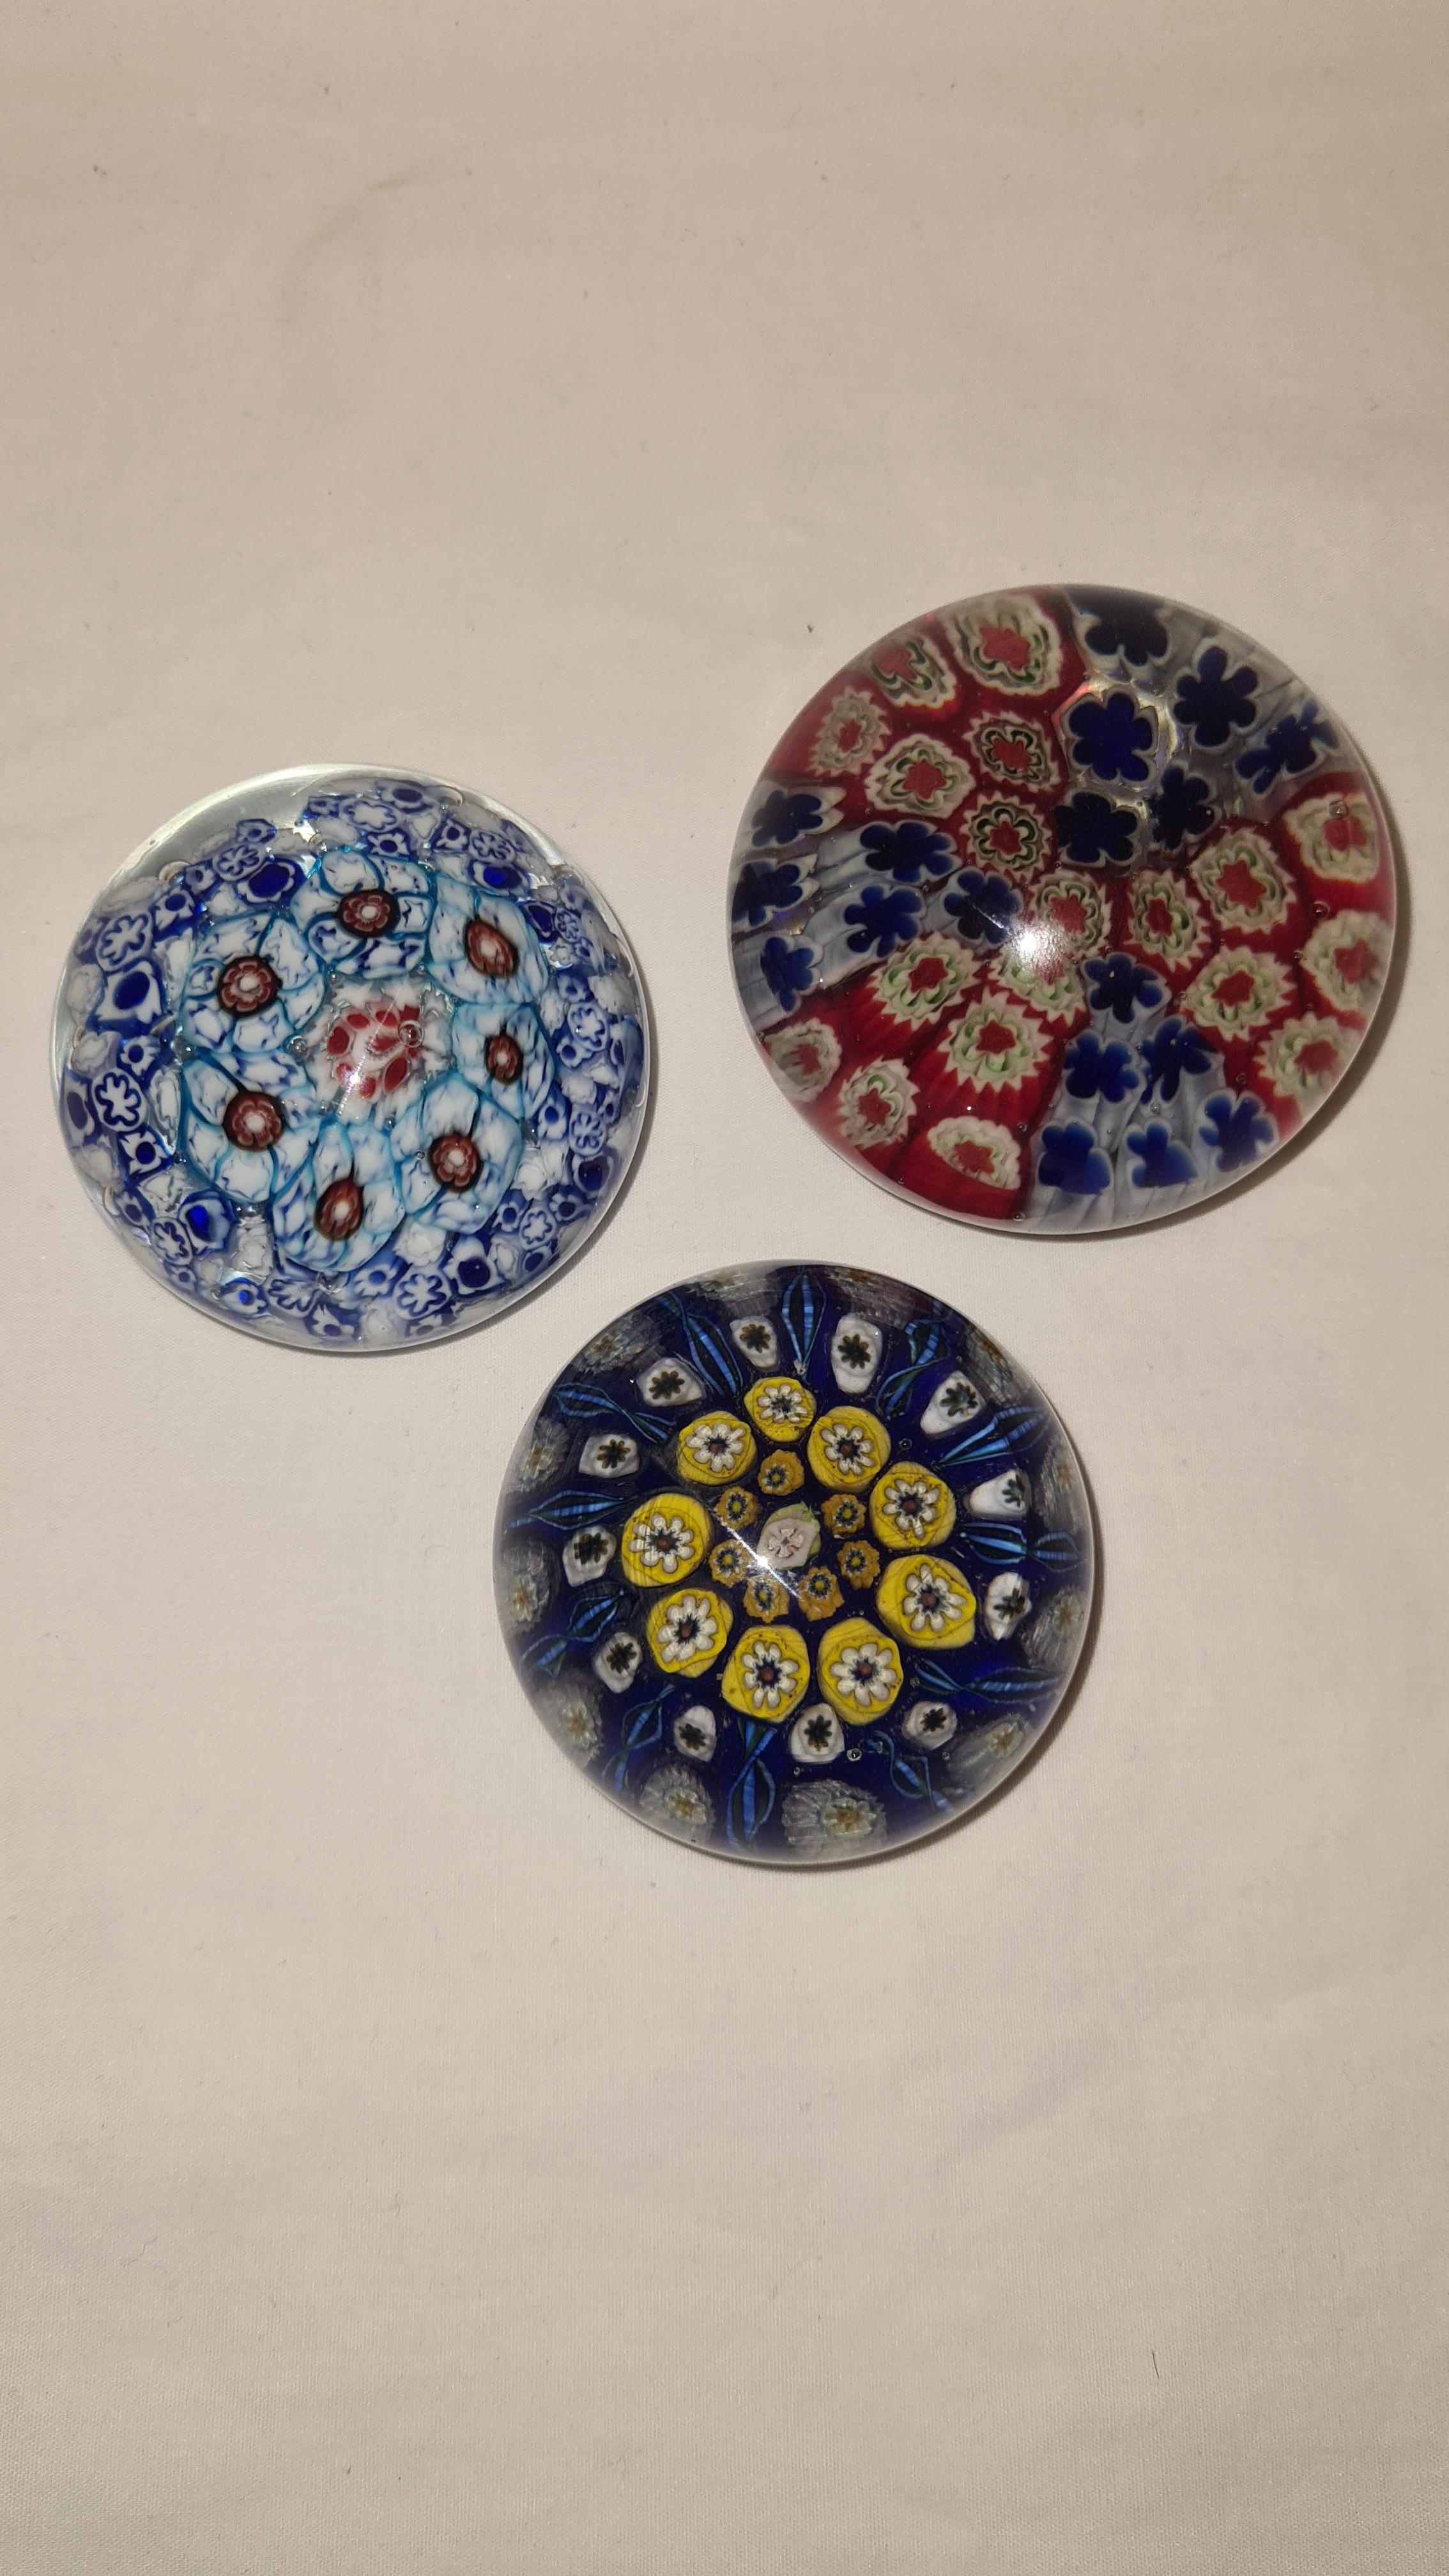 Beautiful middle of century Murano glass millefiore paperweights,set of trees brilliant condition.